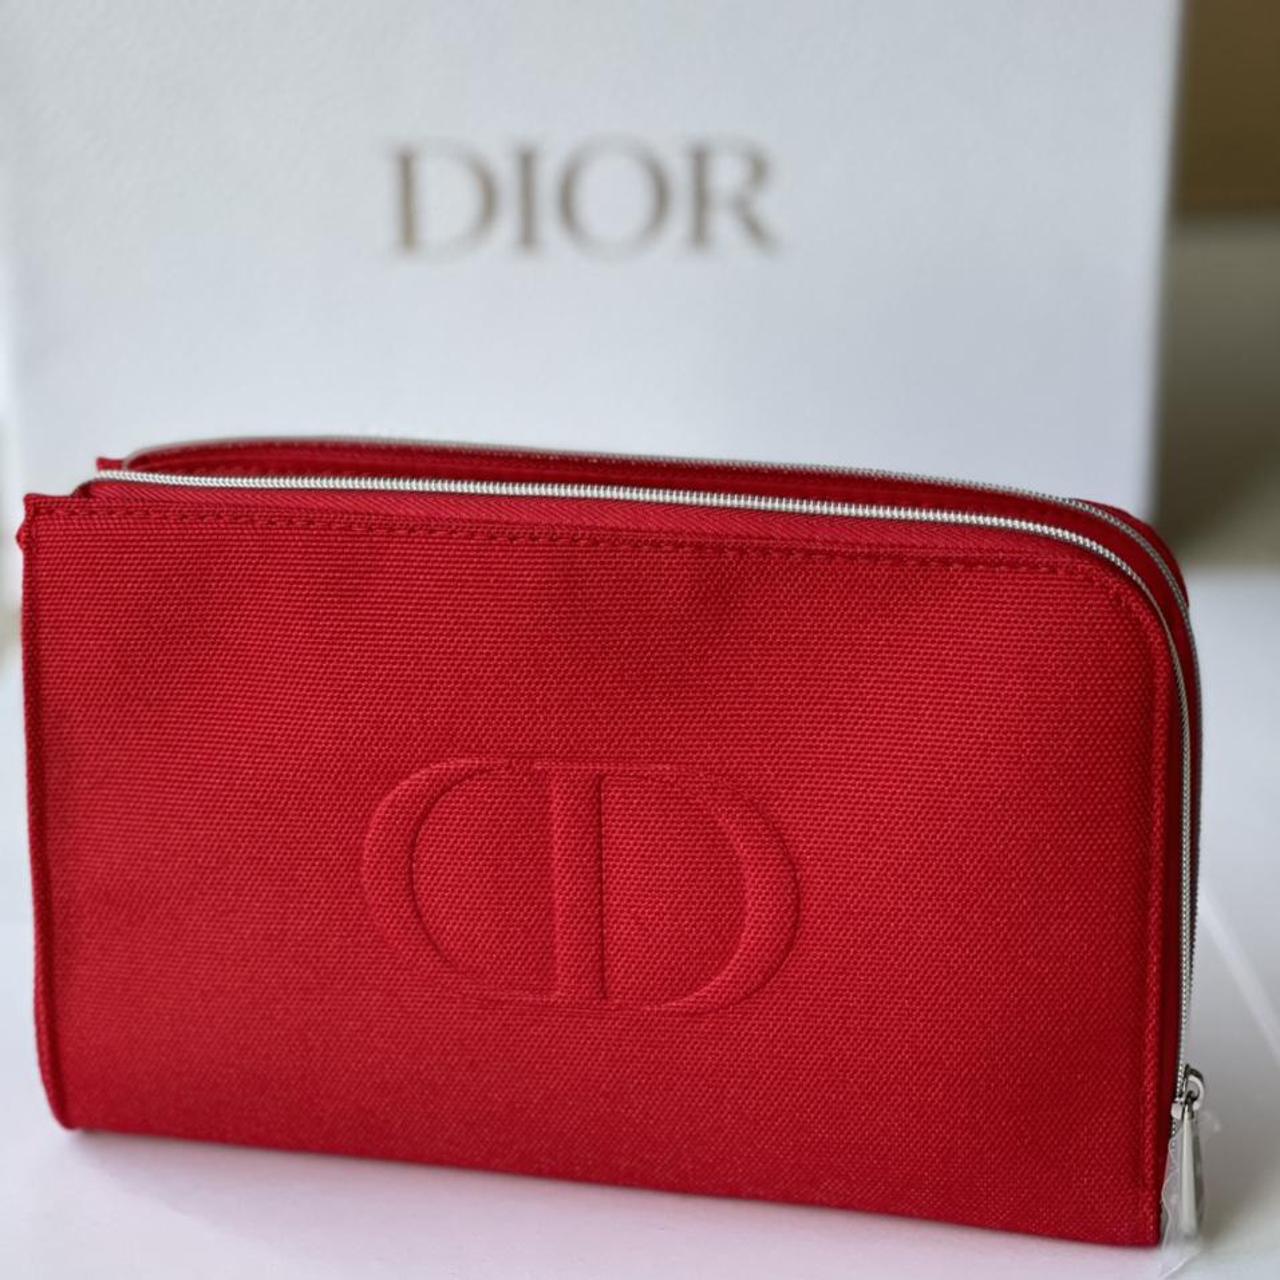 Brand new Dior clutch, can be used as makeup bag or... - Depop